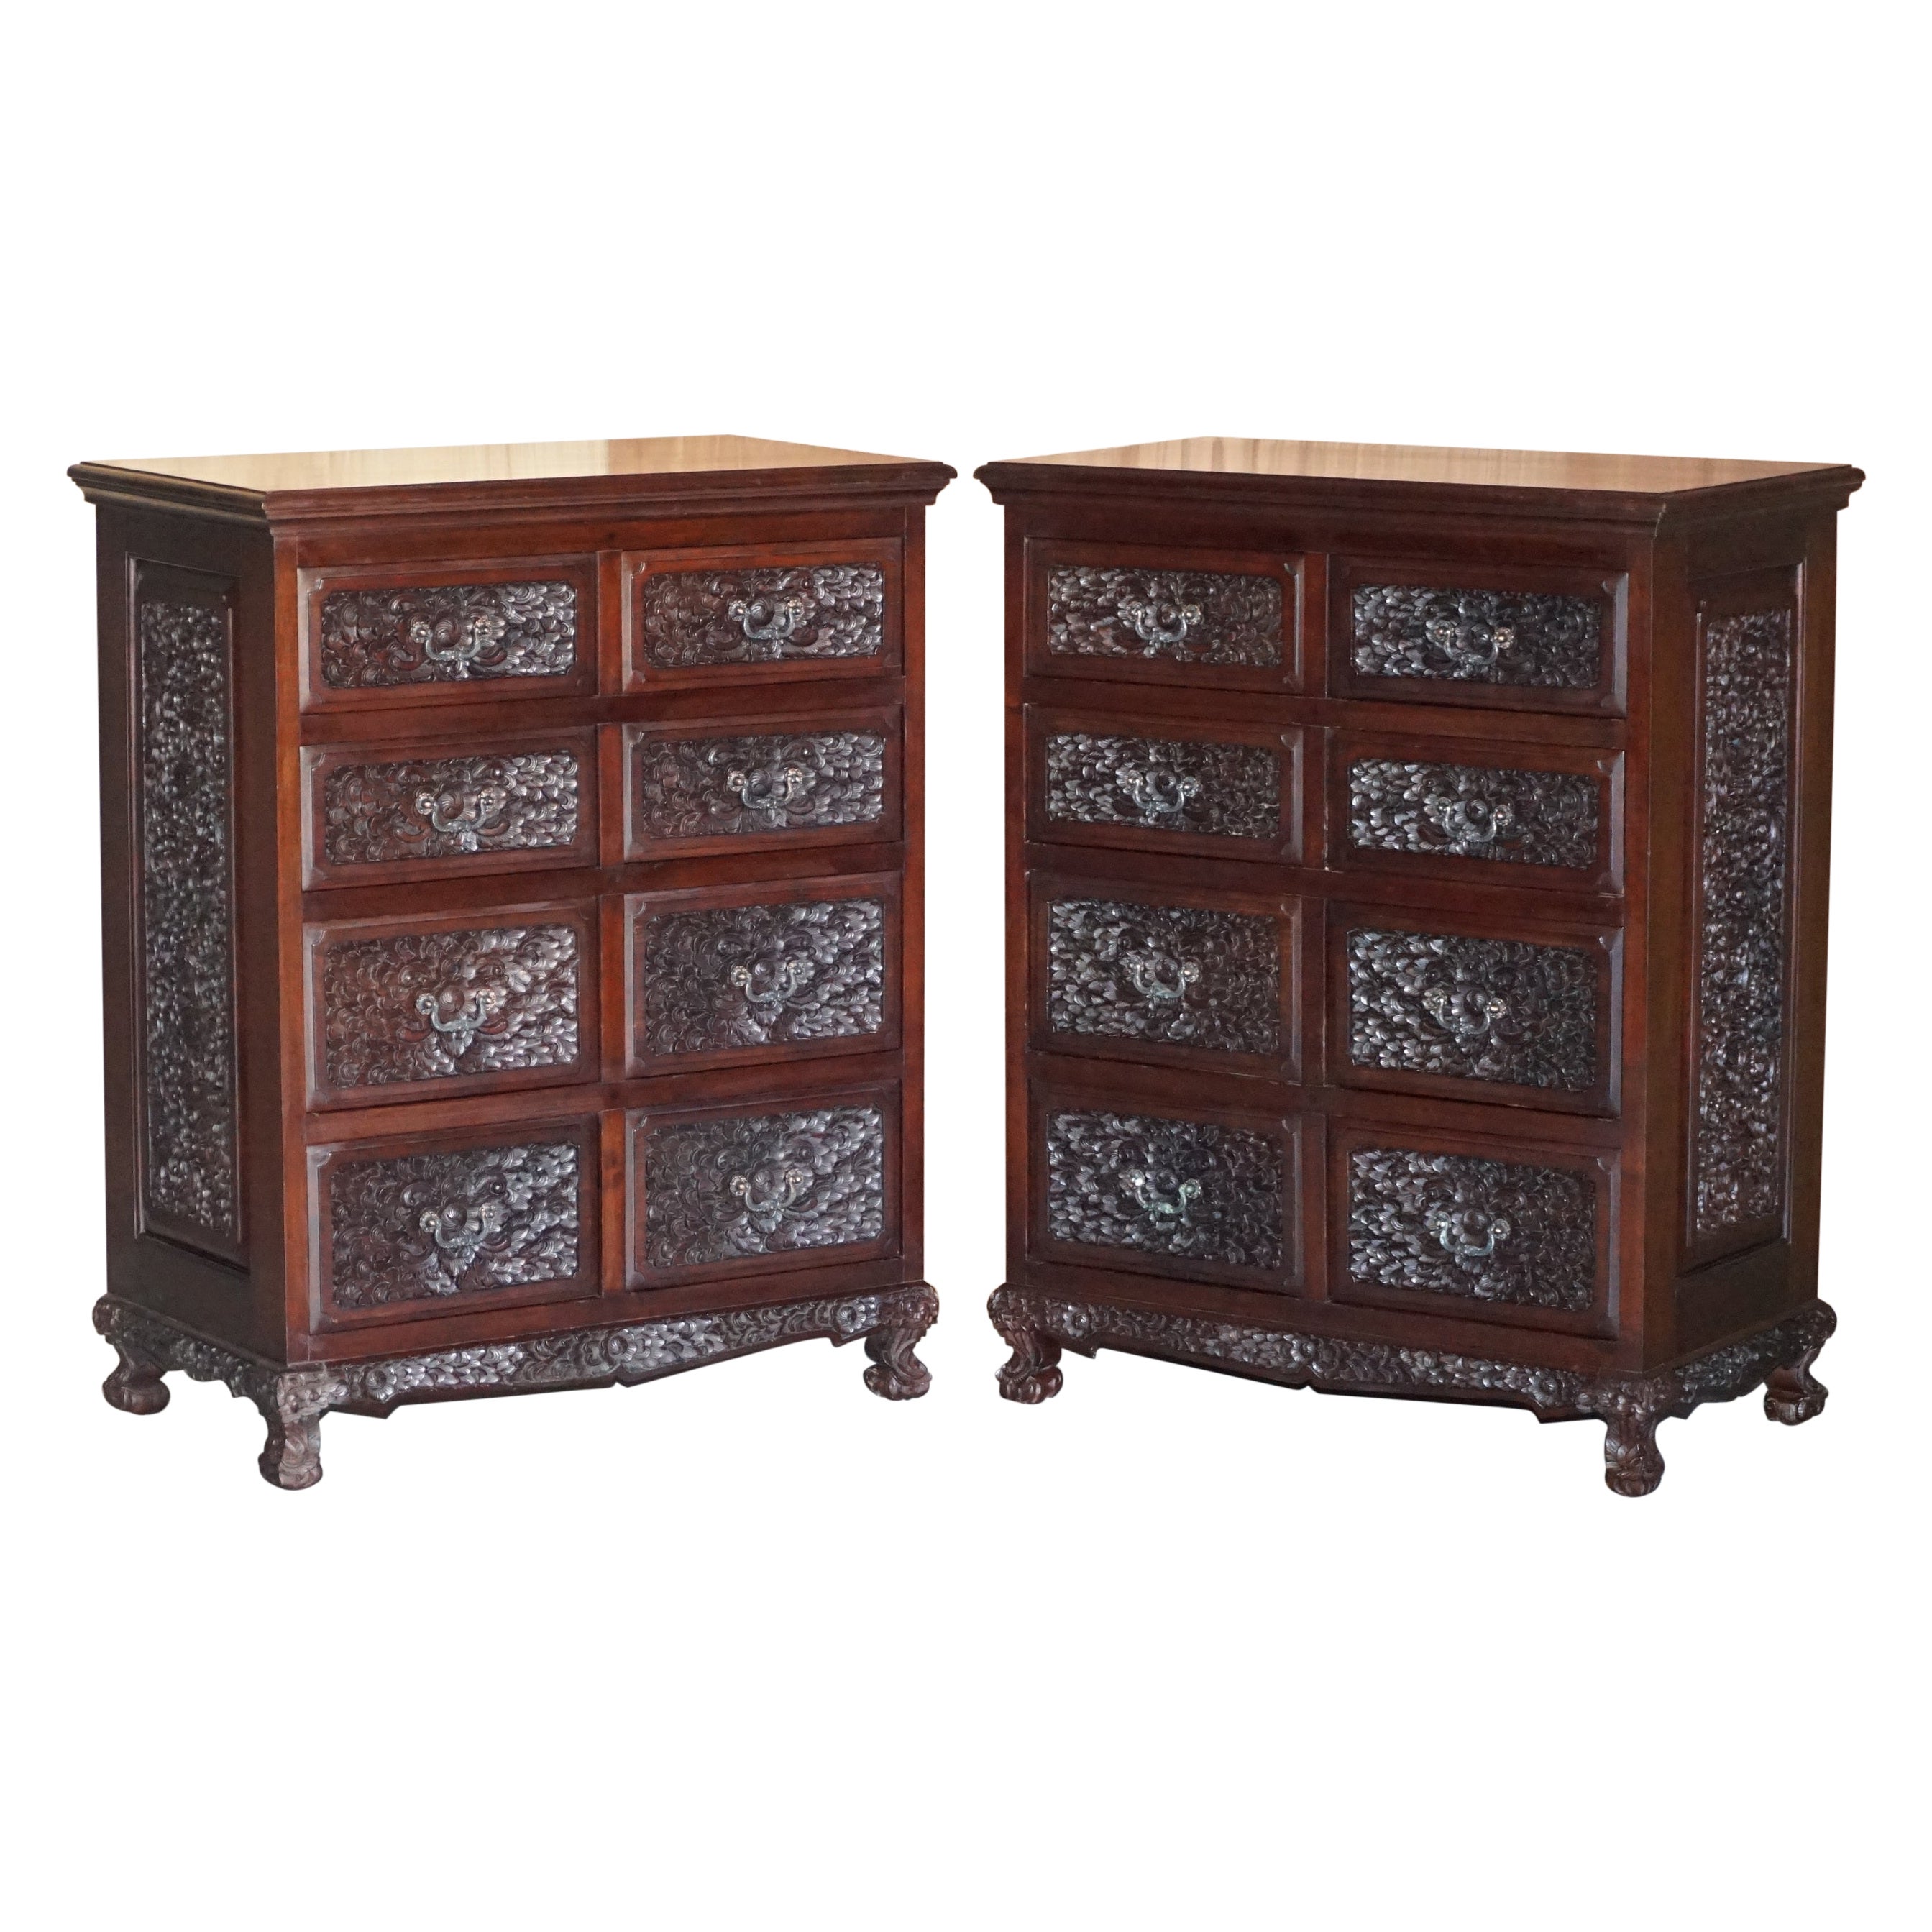 PAIR OF HEAVILY CARVED VINTAGE INDIAN HARDWOOD CHESTS OF DRAWERS PART SUiTE